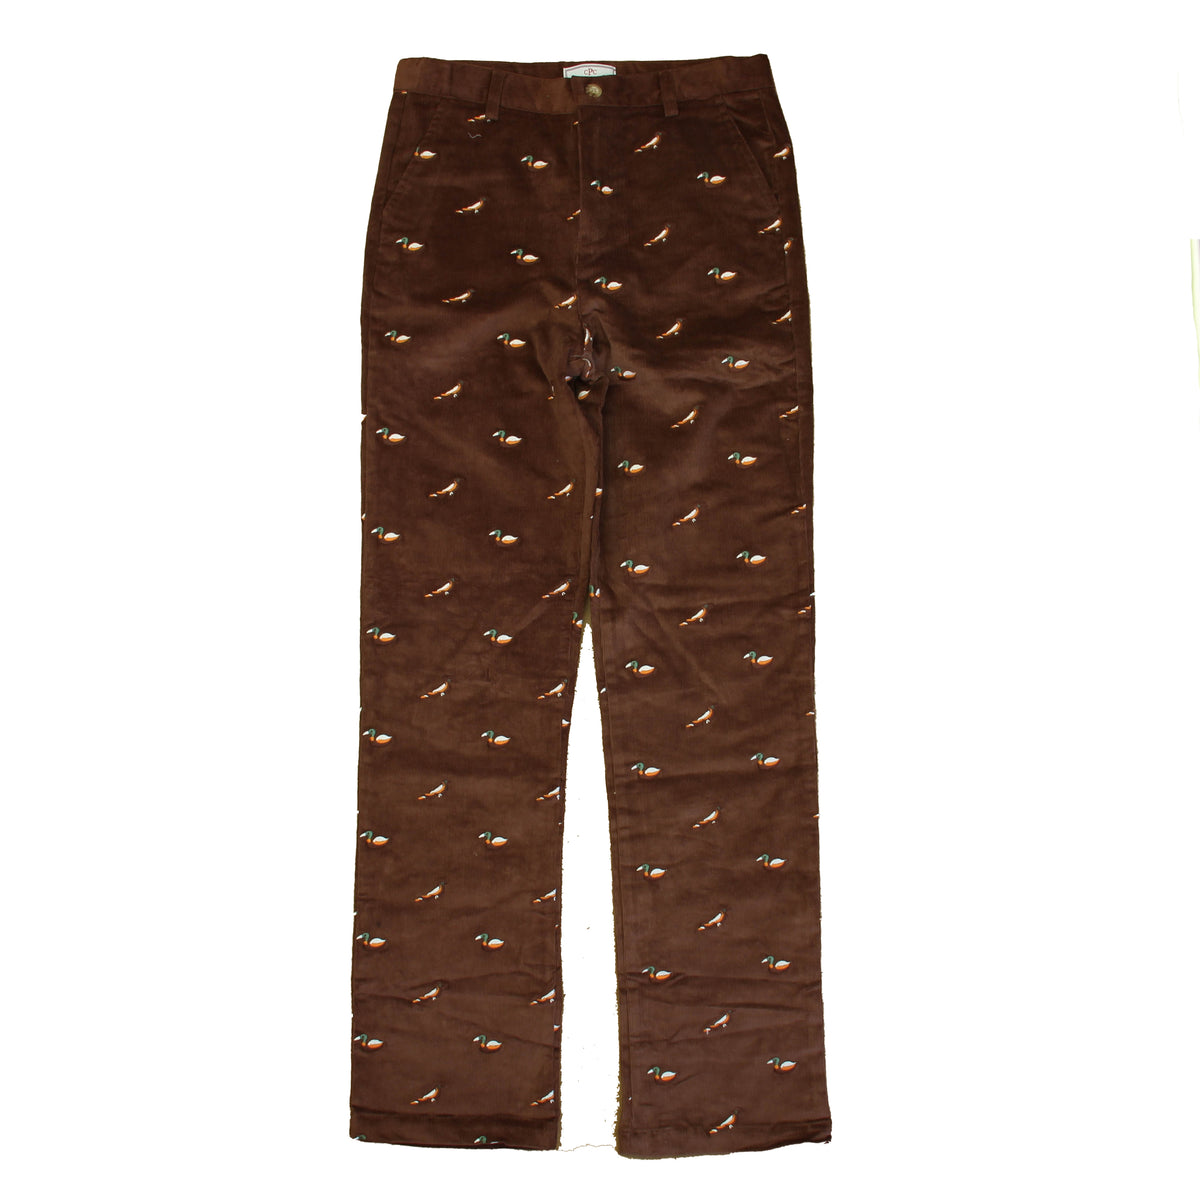 New with Tags: Fudgesicle w/ Bird Embroidery Pants size: 6-14 Years -- FINAL SALE